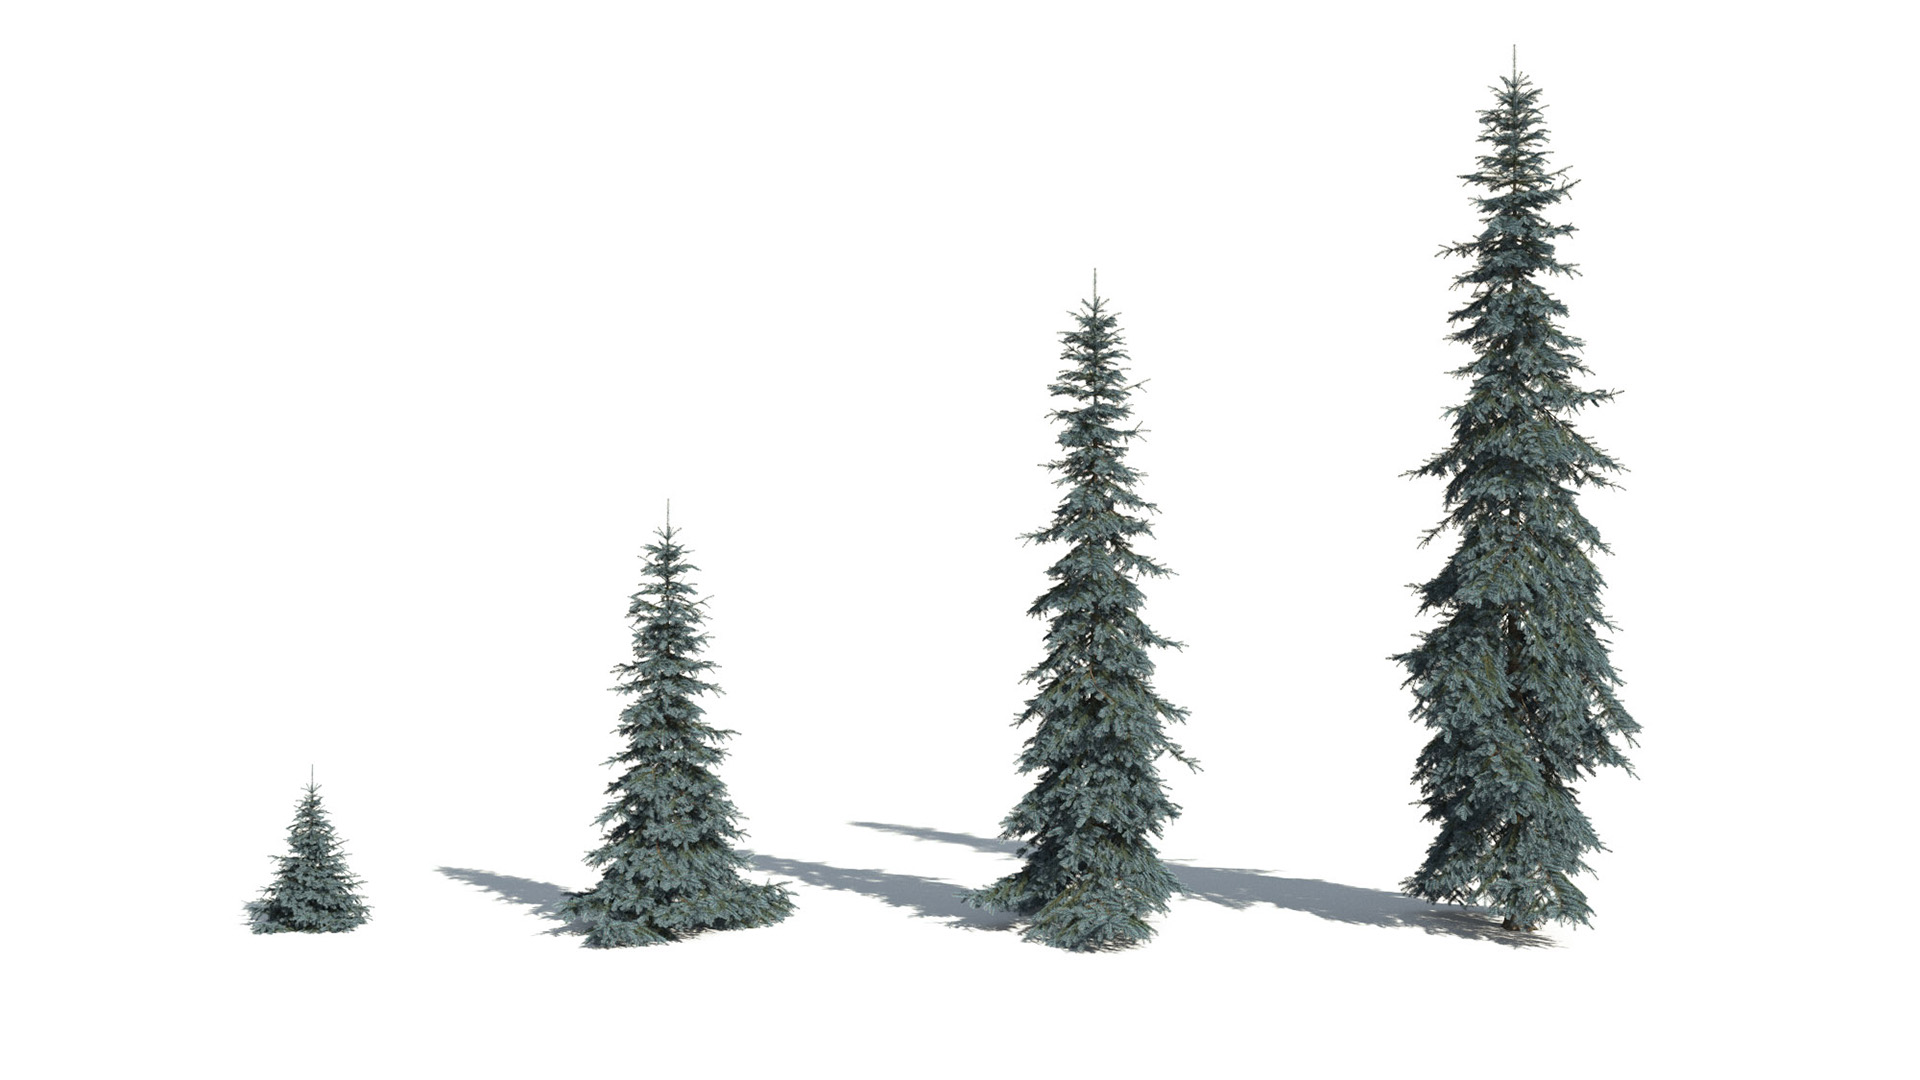 3D model of the Colorado Blue spruce Koster Picea pungens 